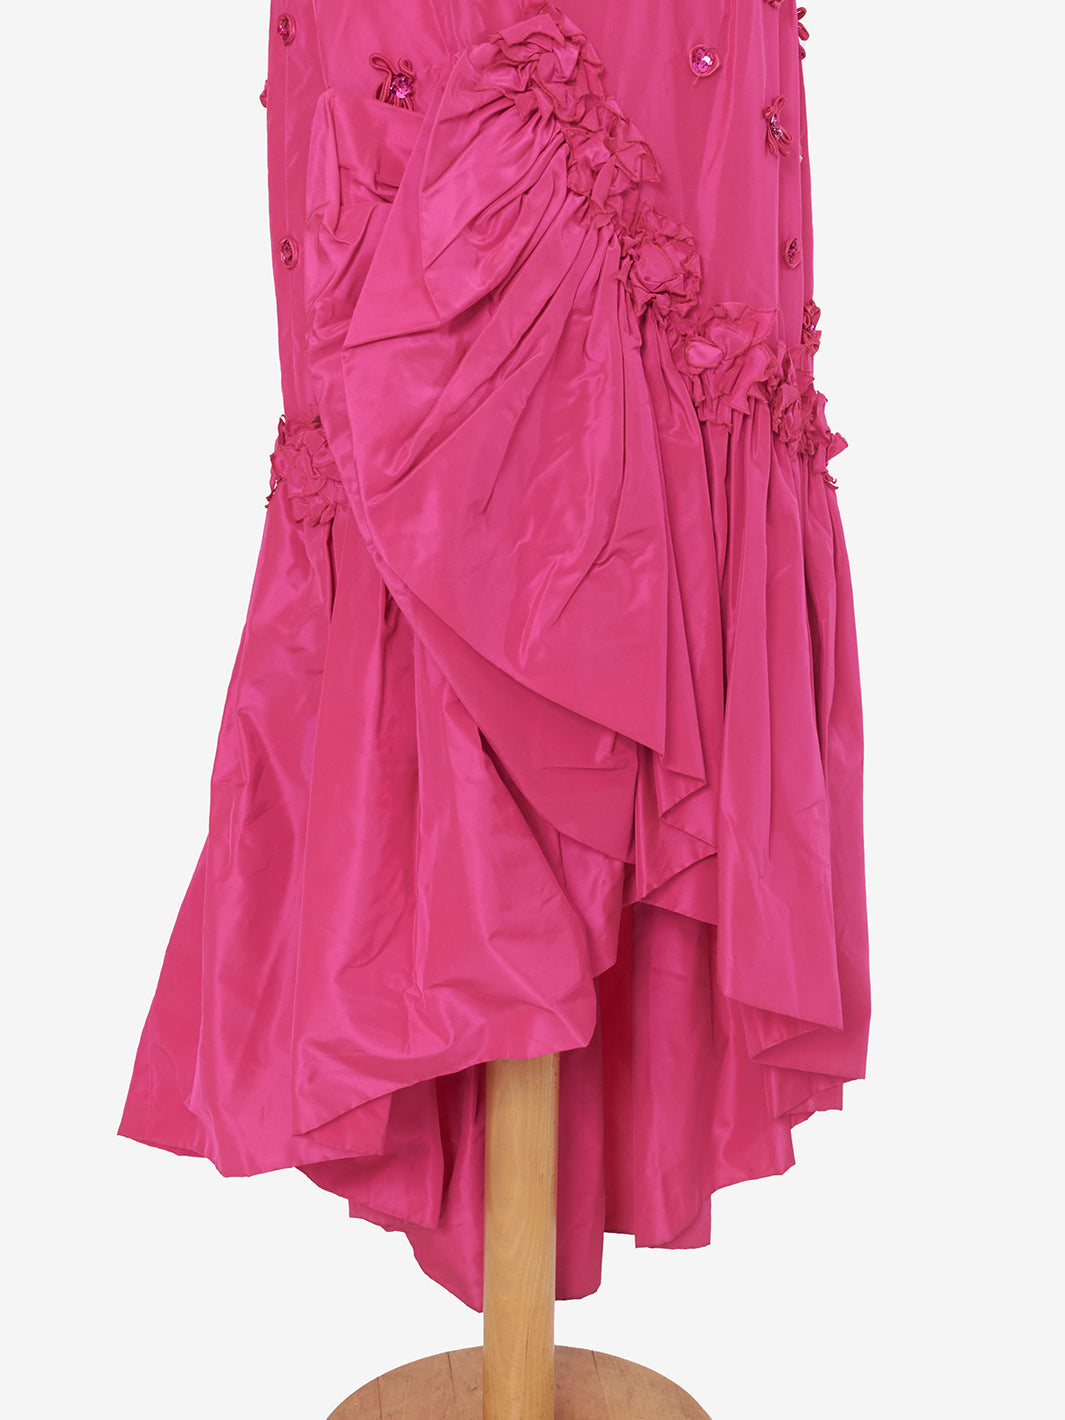 Fuchsia Vintage Dress with fancy applications